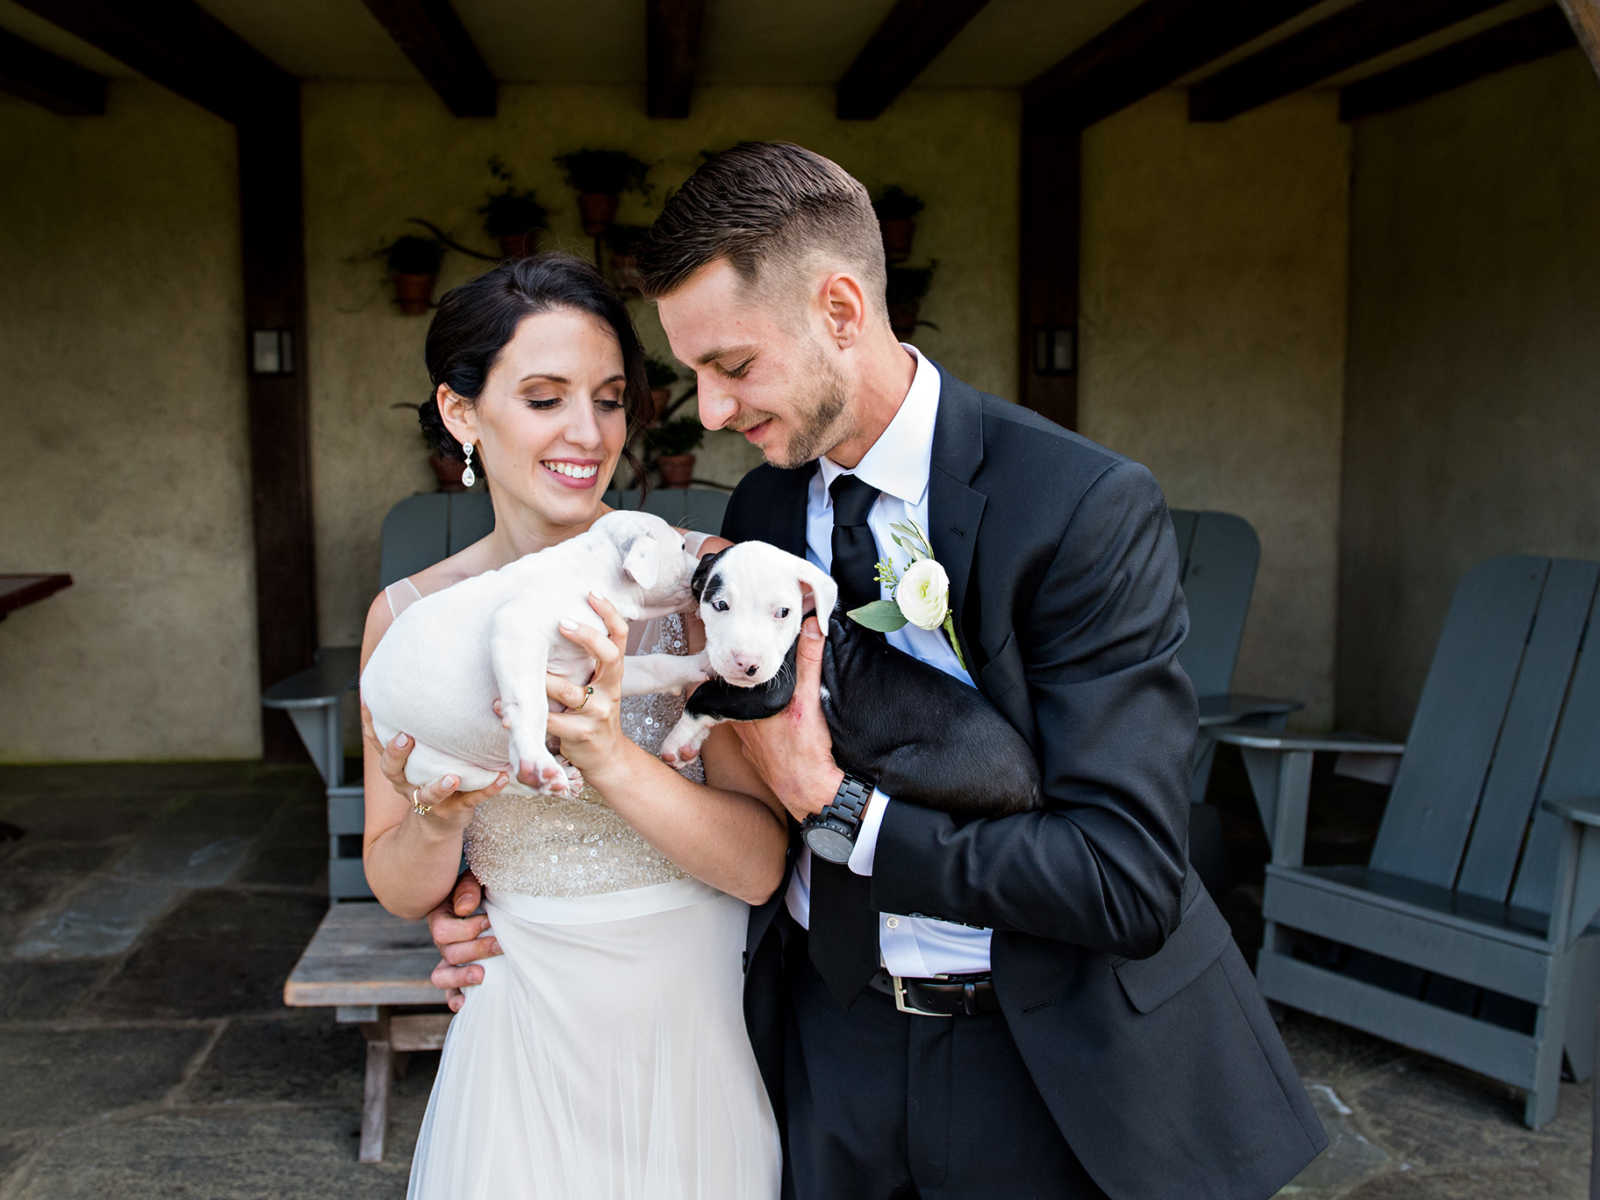 Bride and groom stare down at rescue puppy that bride is holding